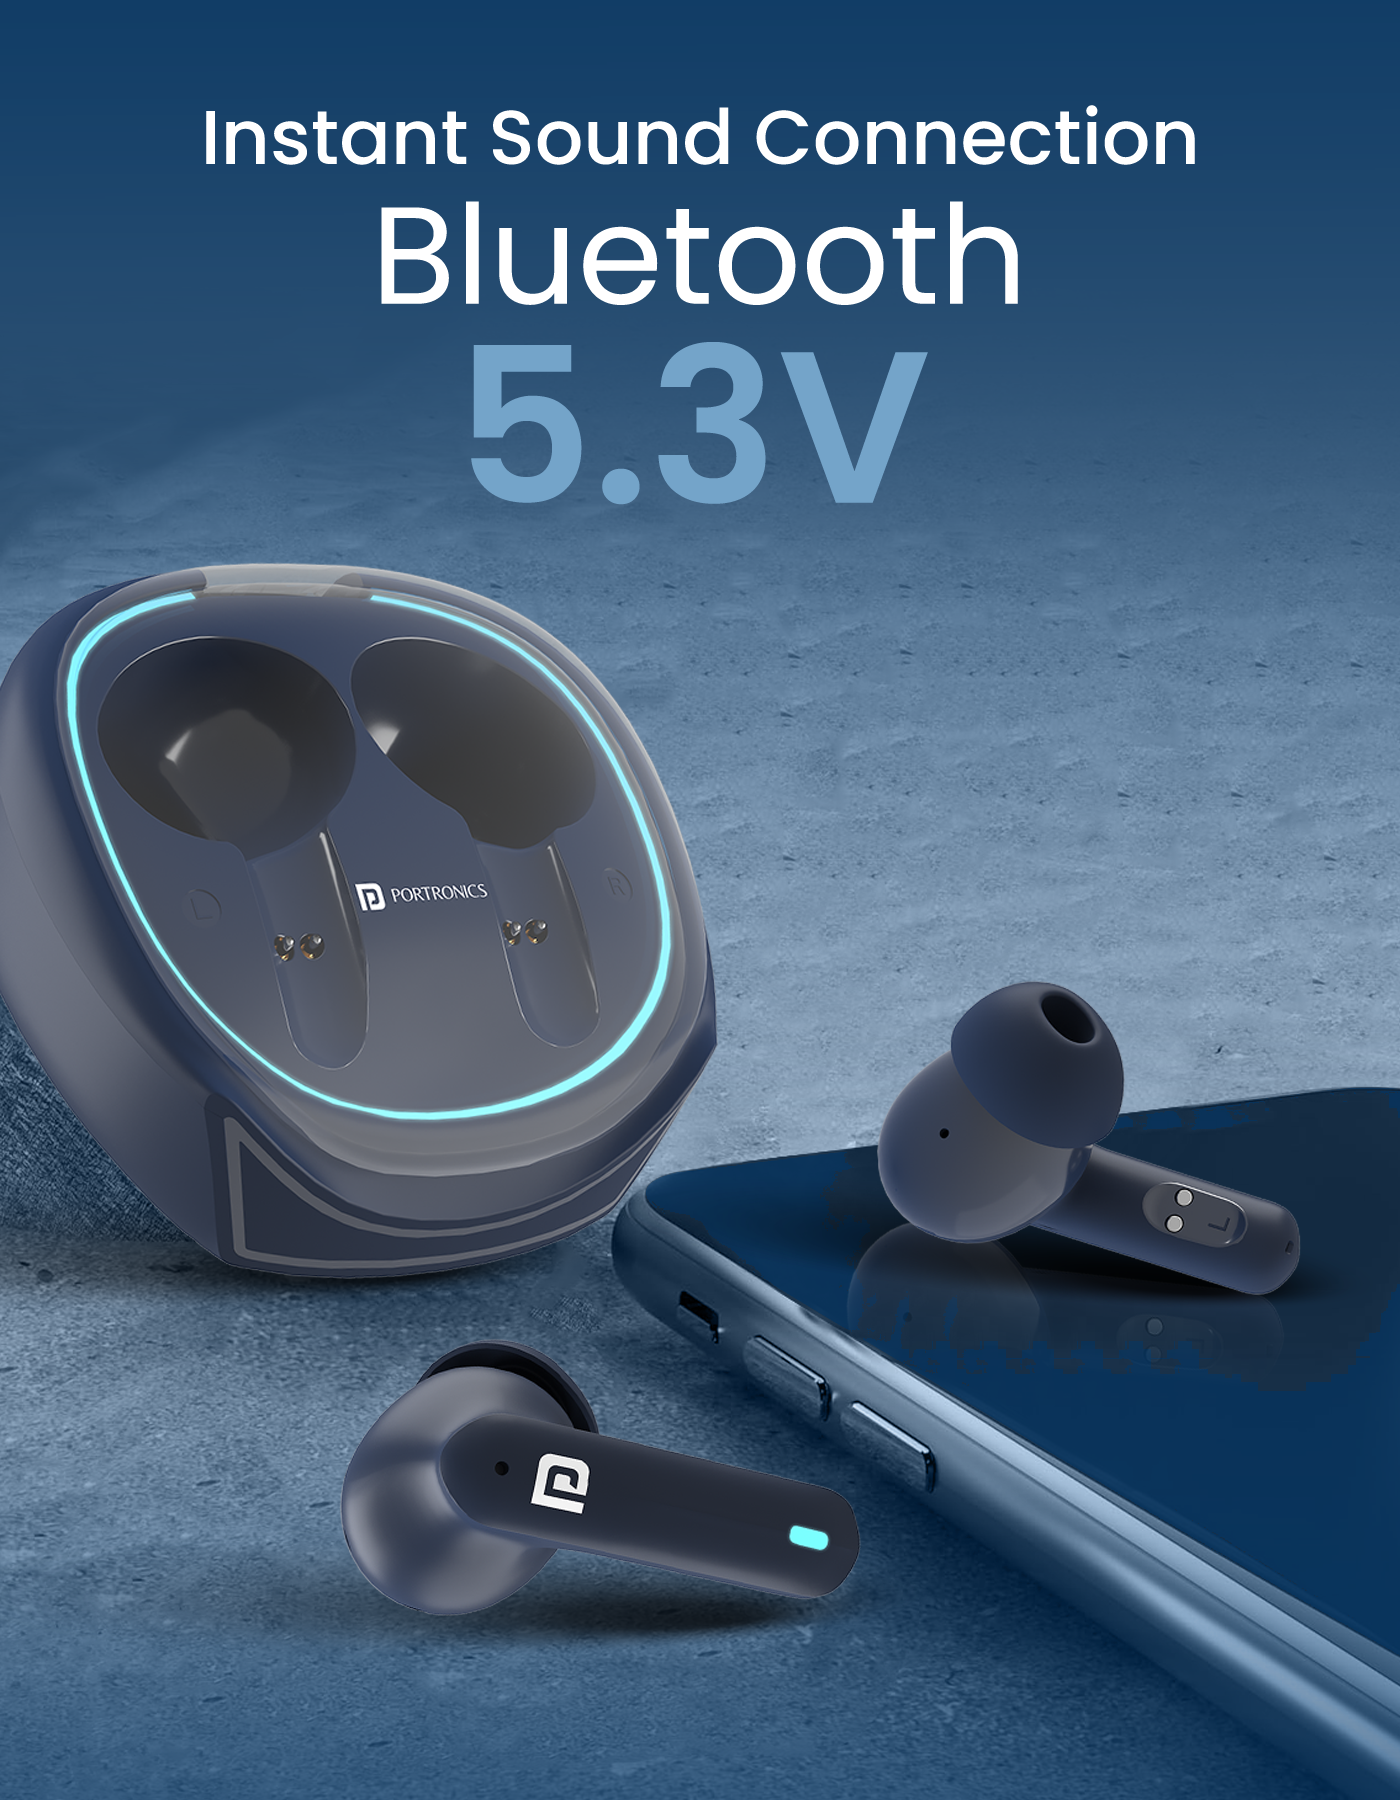 Portronics Harmonics Twins s11 TWS wireless bluetooth earbuds |wireless earbuds| best earbuds online with ANC and ENC feature